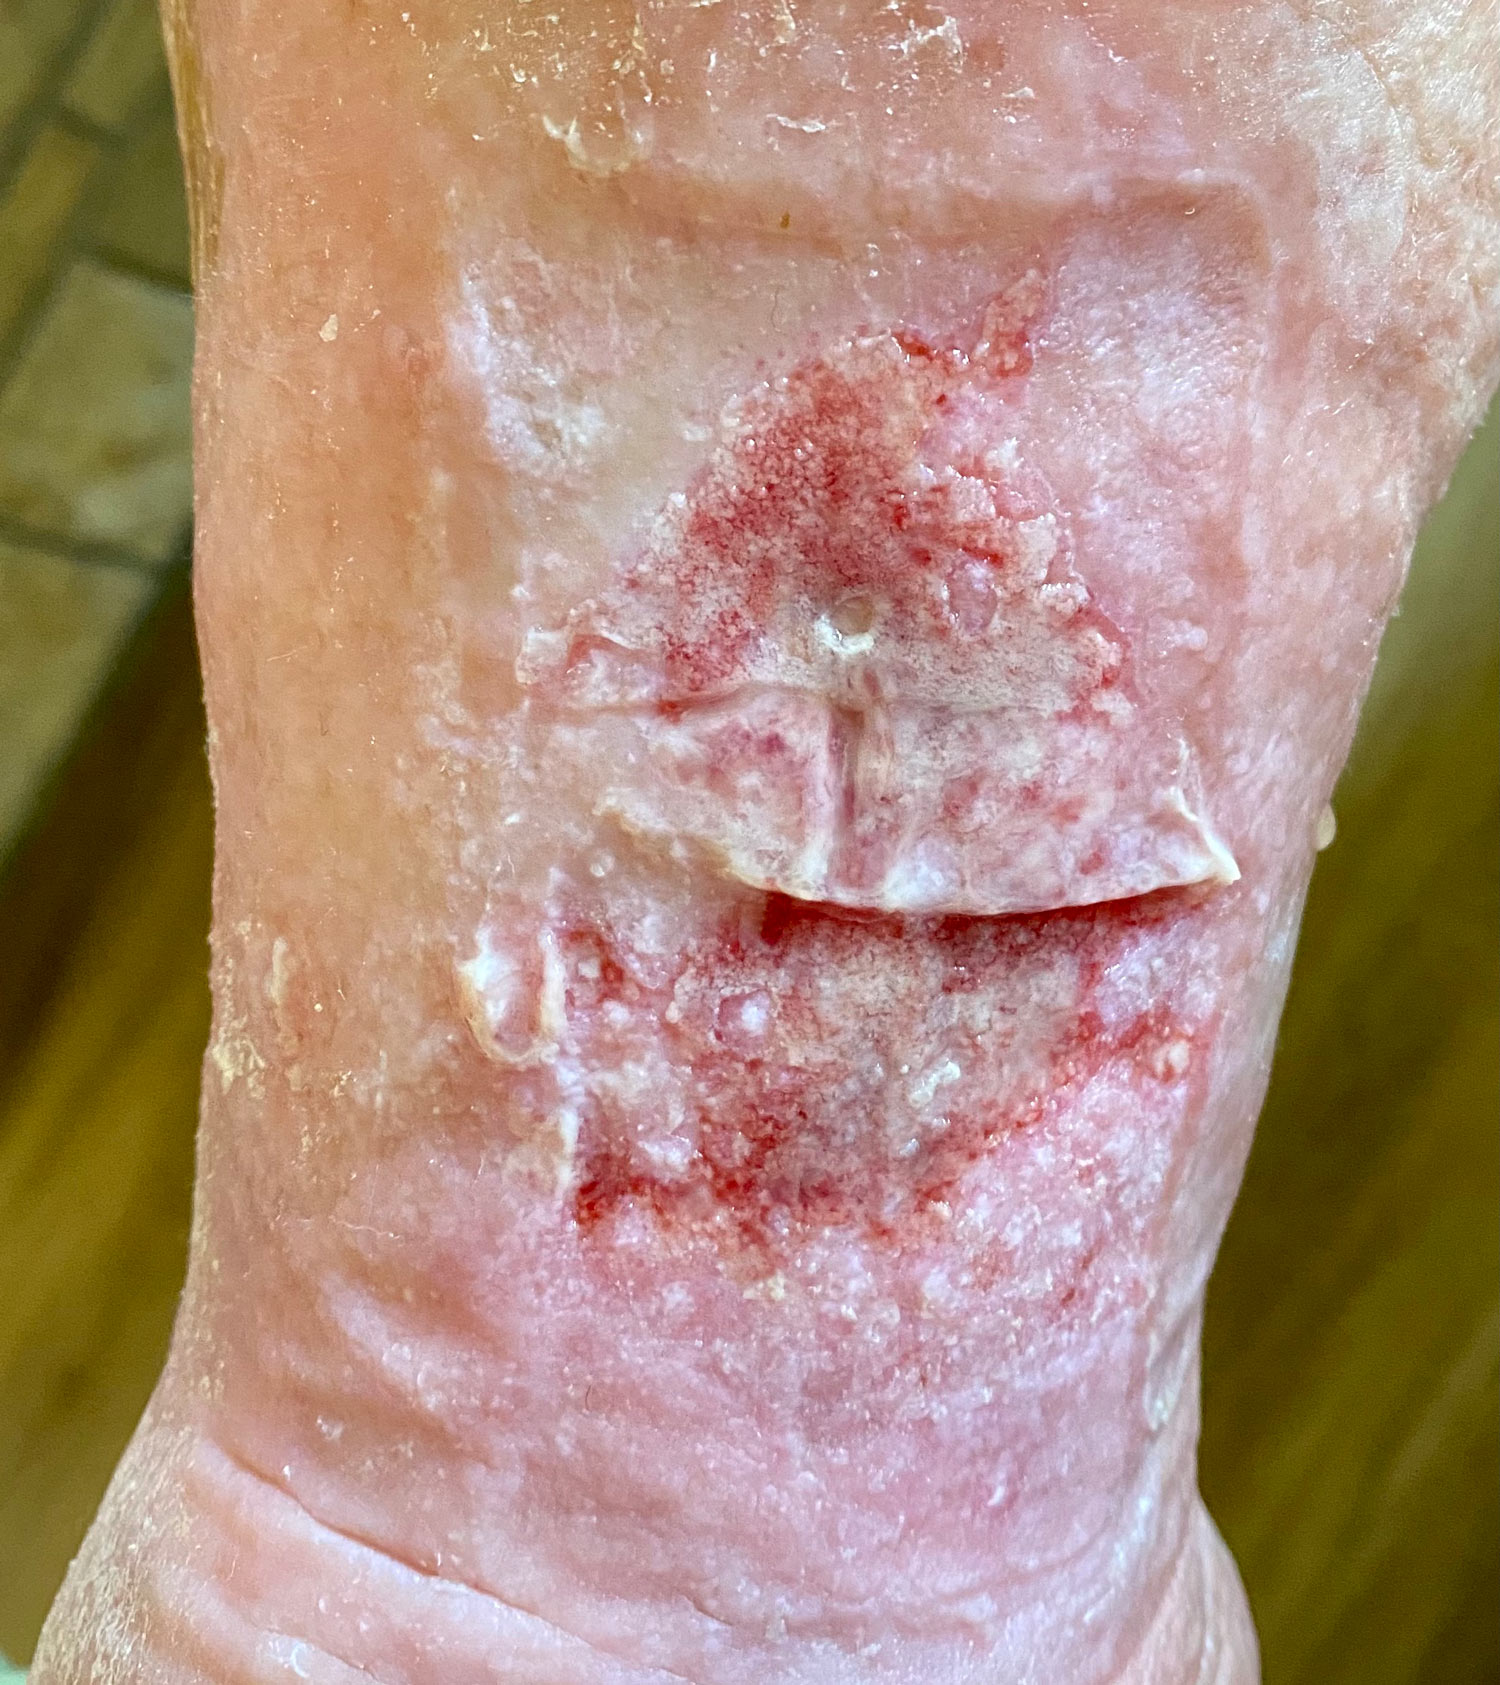 Atypical Wounds: What Every Clinician Should Know